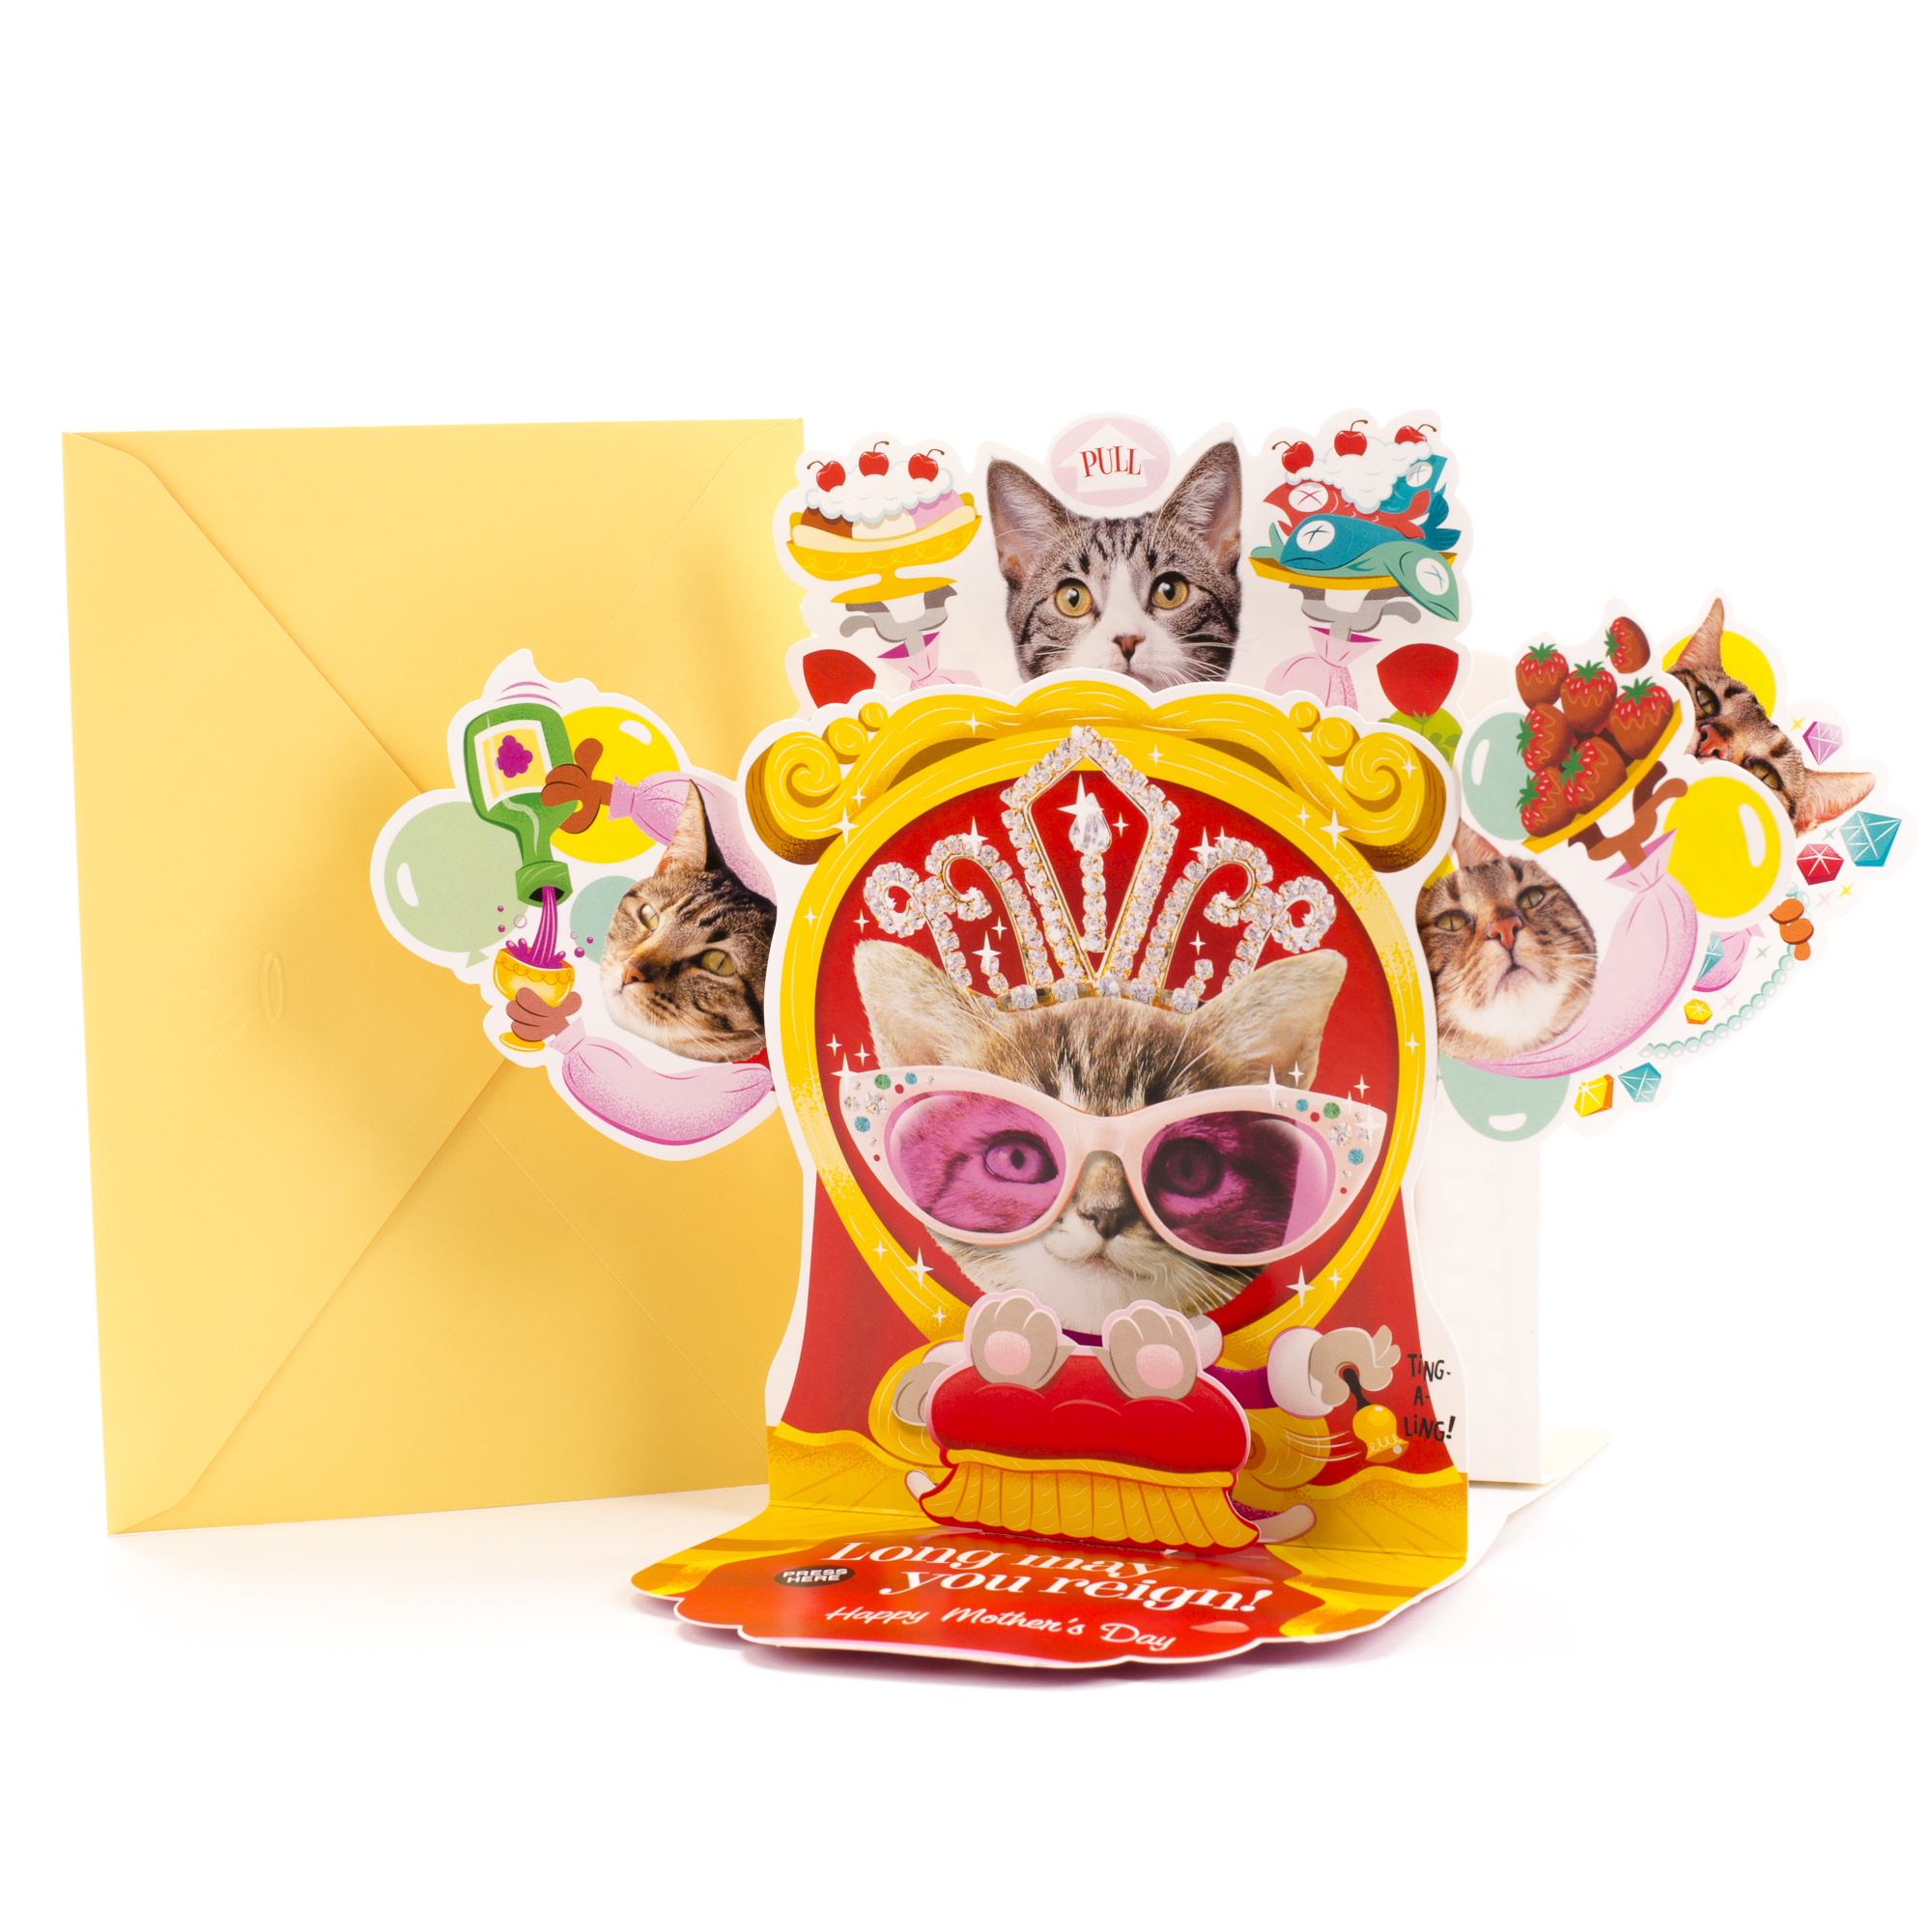 Hallmark Funny Pop Up Mother's Day Card with Song (Cat Queen, Plays Rule Britannia) - image 1 of 7